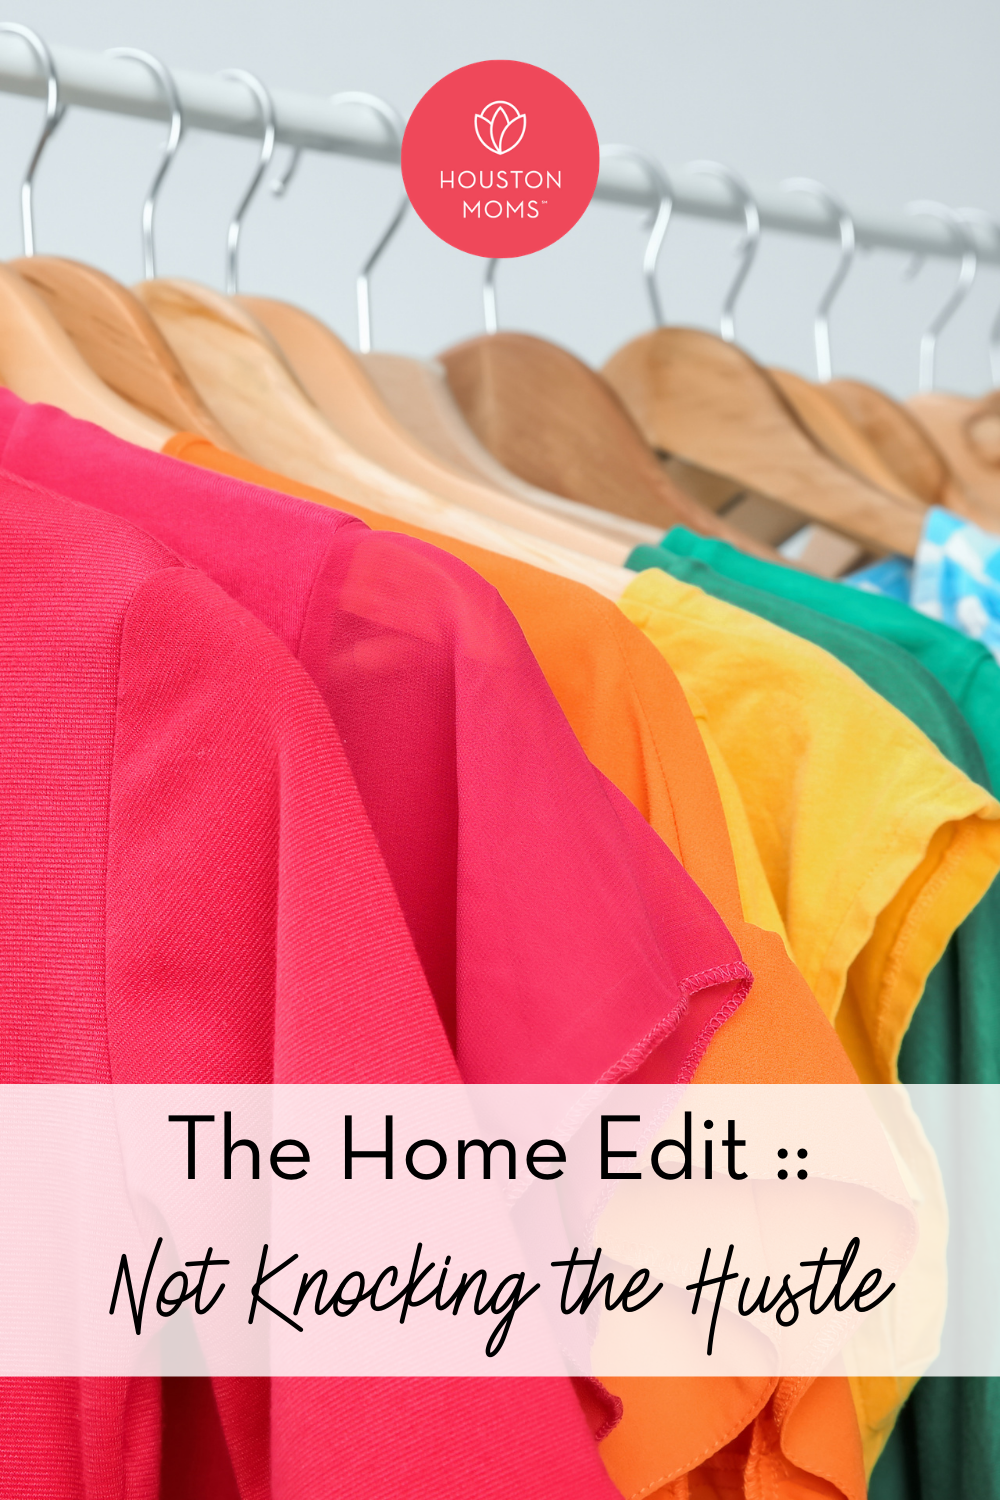 Houston Moms "The Home Edit:: Not Knocking the Hustle" #houstonmoms #houstonmomsblog #momsaroundhouston